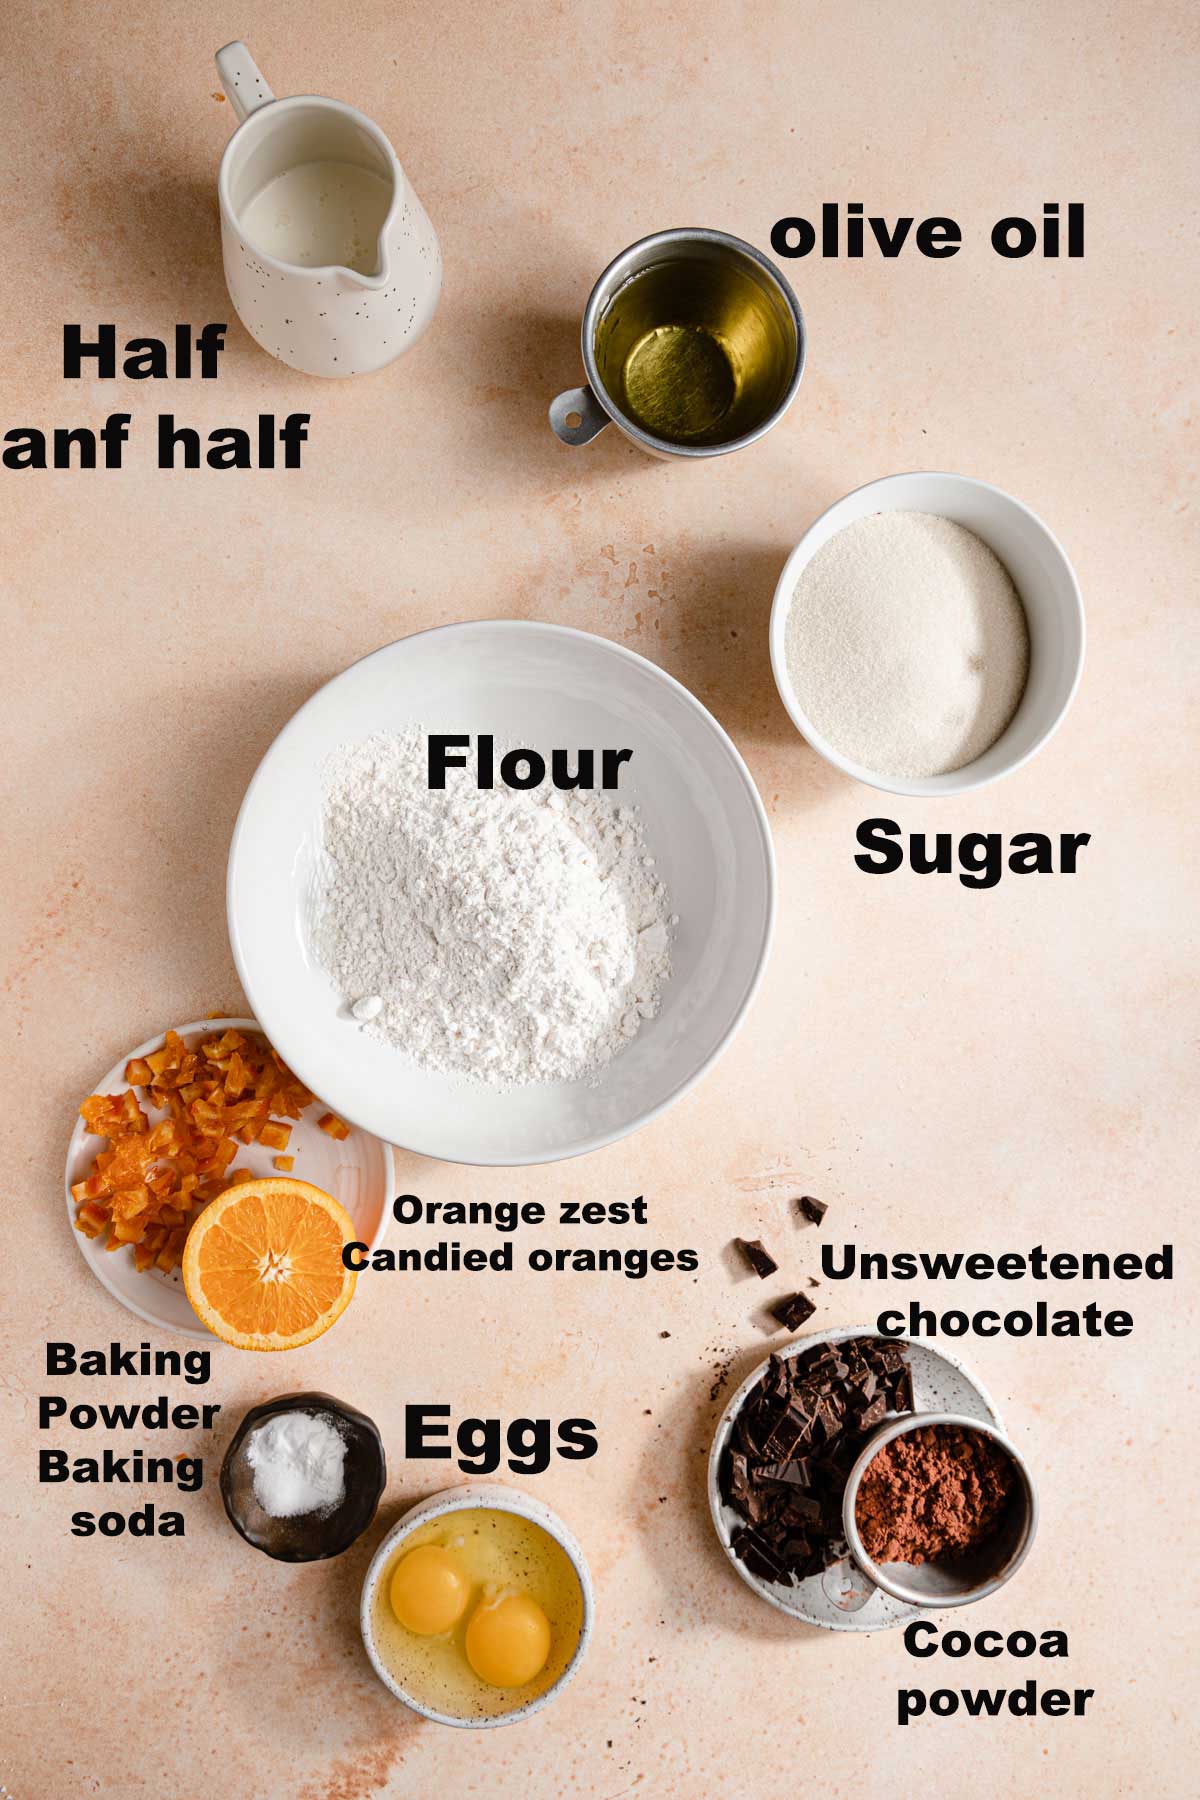 Ingredients in bowls flour, sugar, eggs, baking powder and baking soda, cocoa powder, unsweetened chocolate, olive oil, half and half